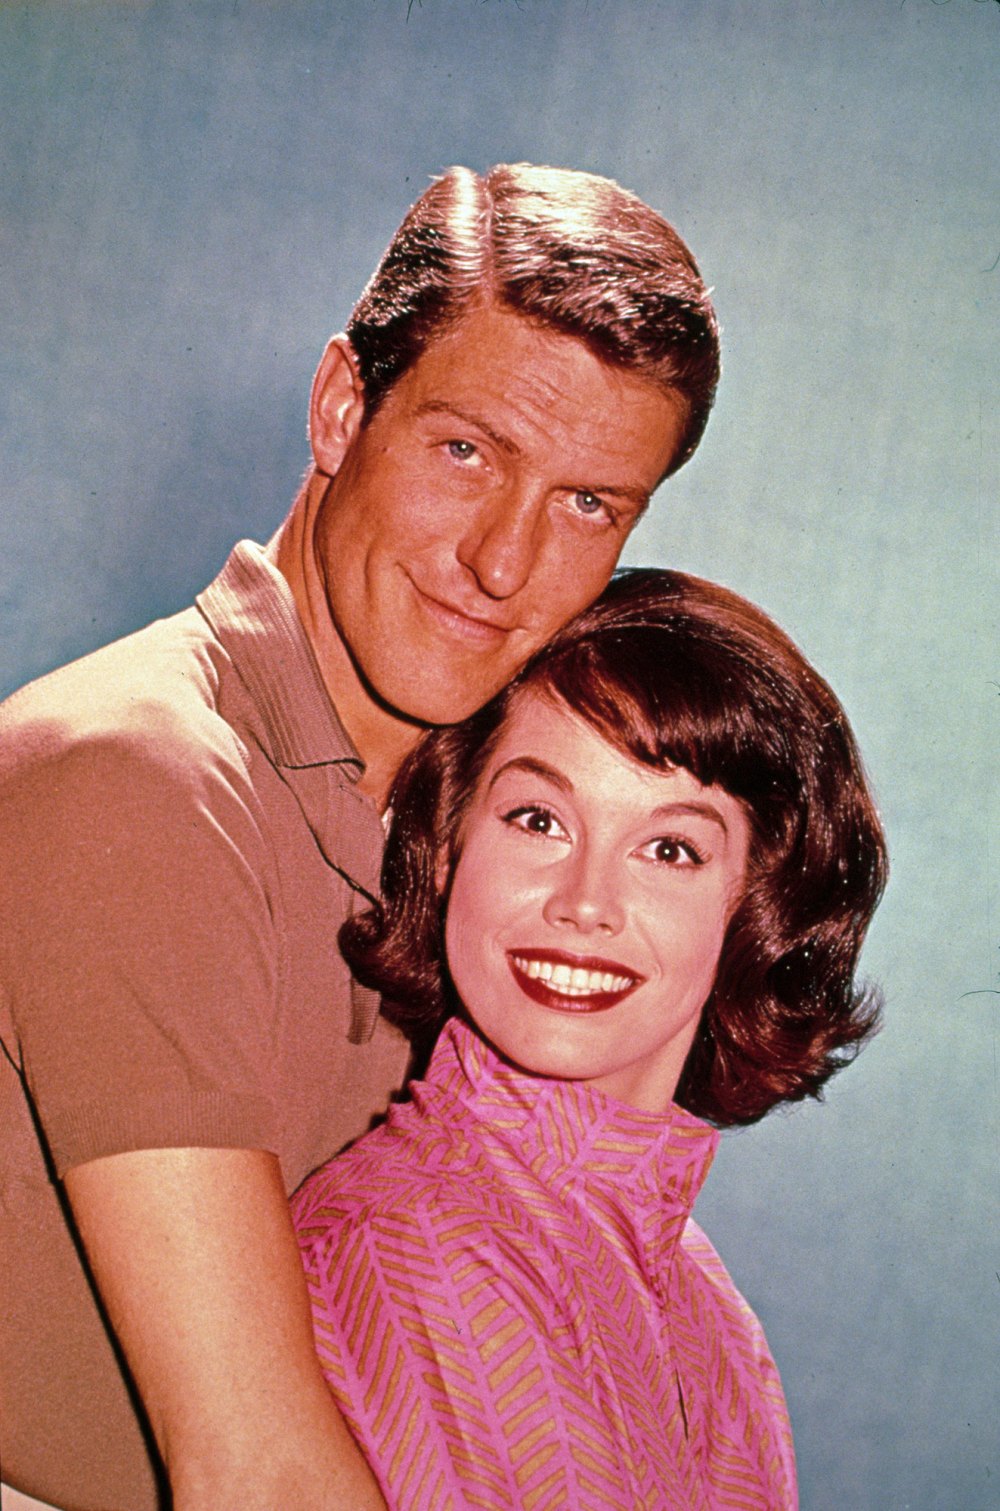 Dick Van Dyke Pays Tribute to Mary Tyler Moore: ‘She Left an Imprint on Television Comedy’